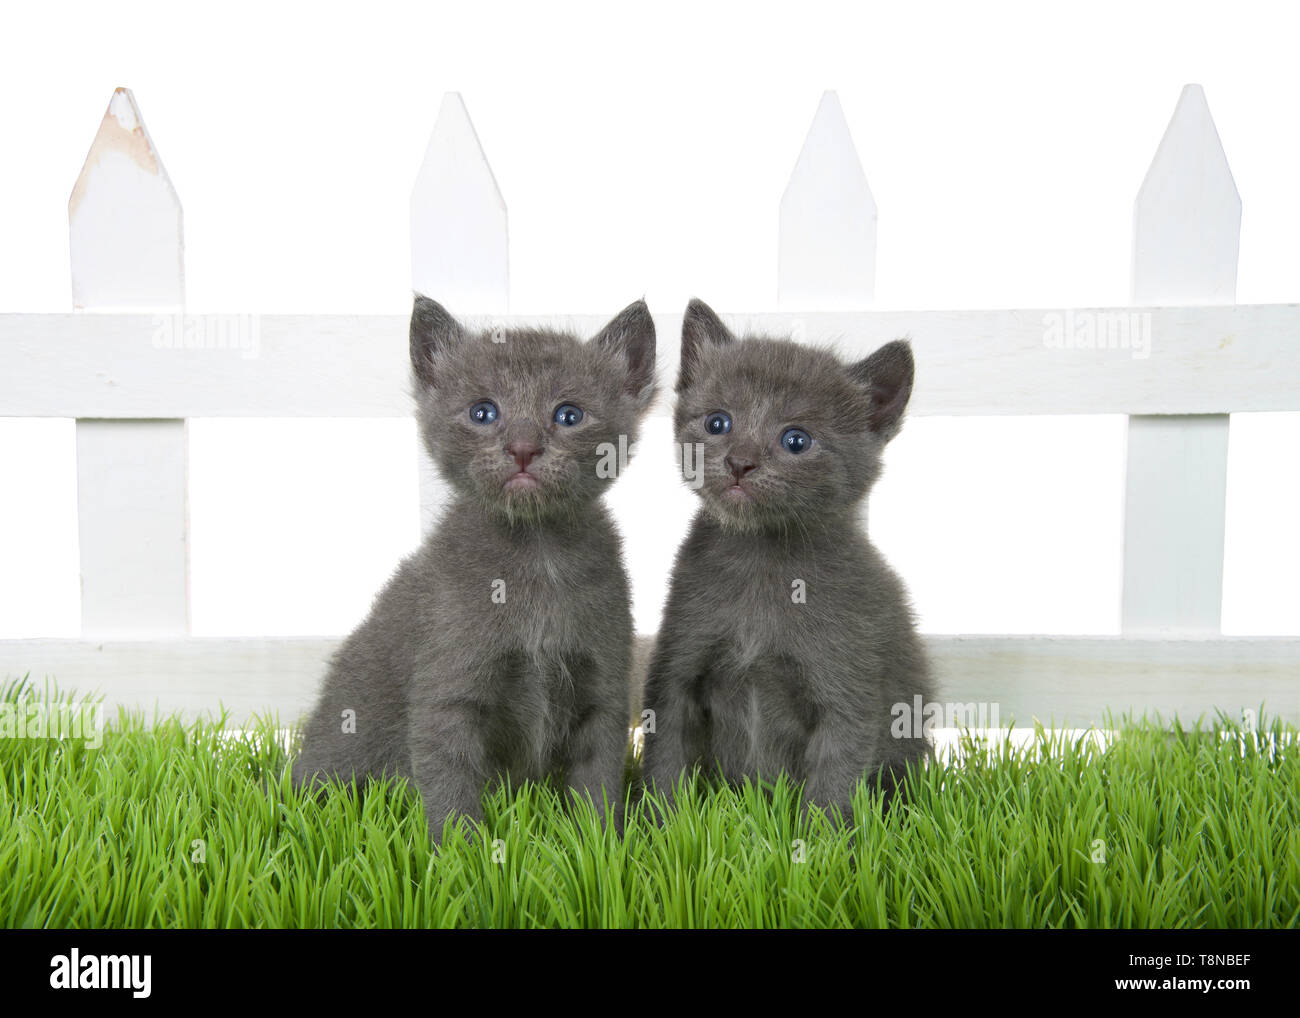 Two adorable grey tabby kitten sitting in green grass in front of a white picket fence isolated on white background. Kittens looking slightly to viewe Stock Photo